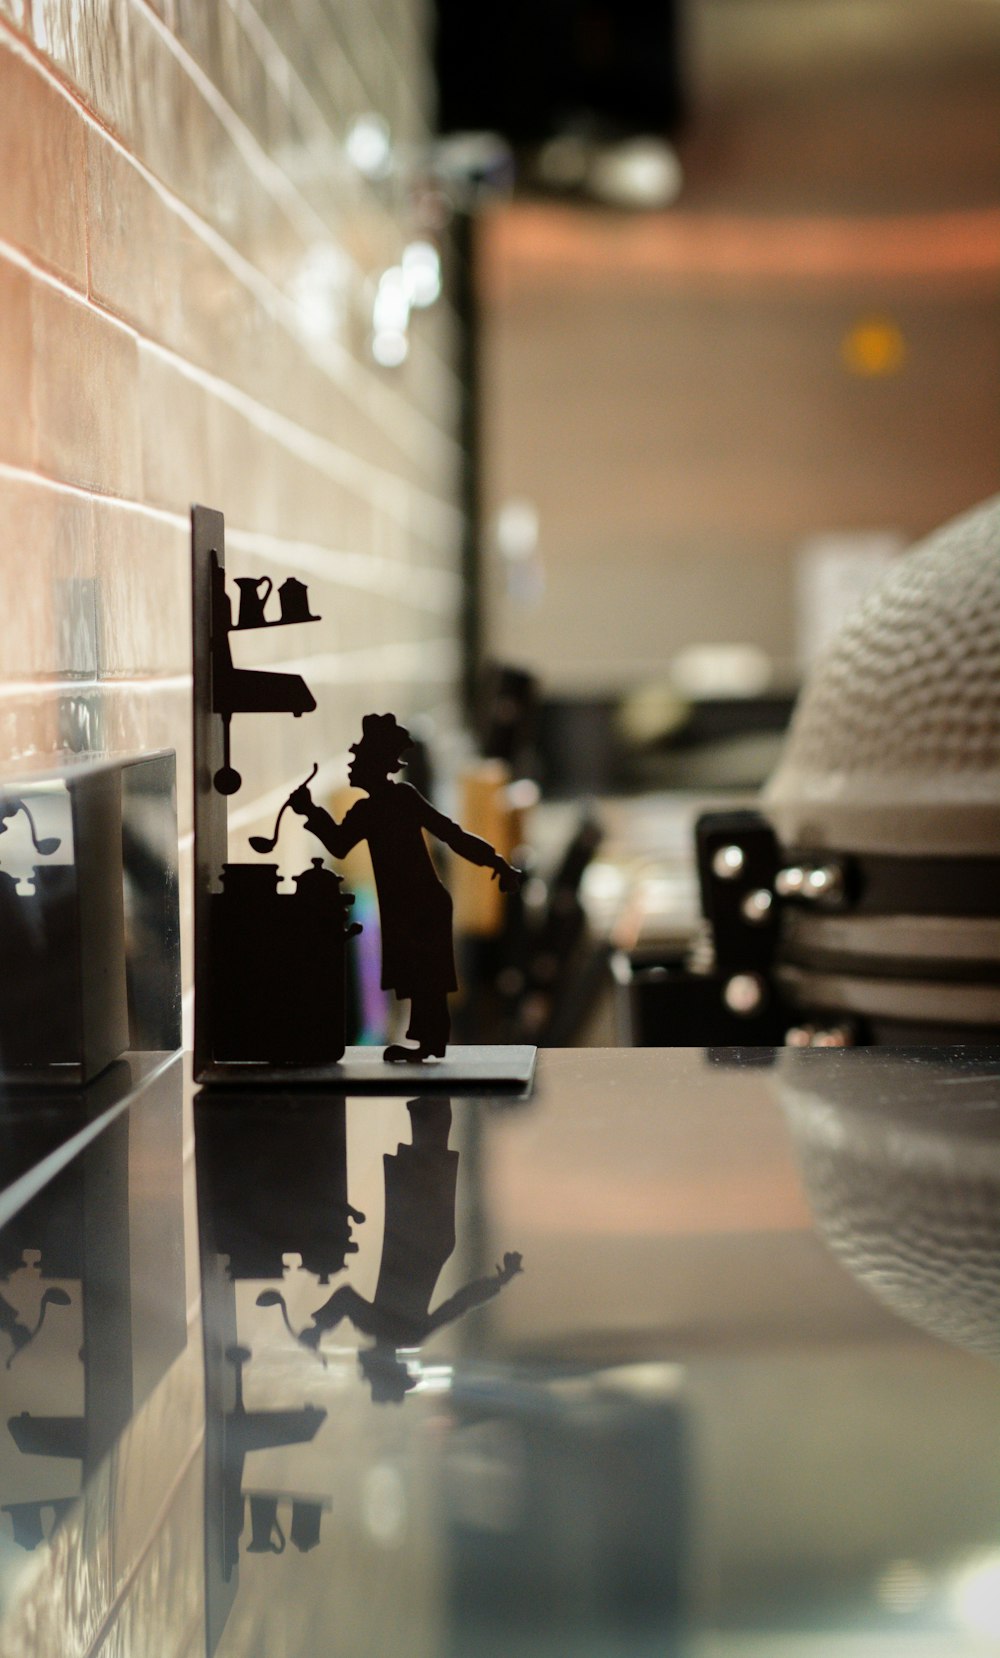 a silhouette of a man with a gun on a counter